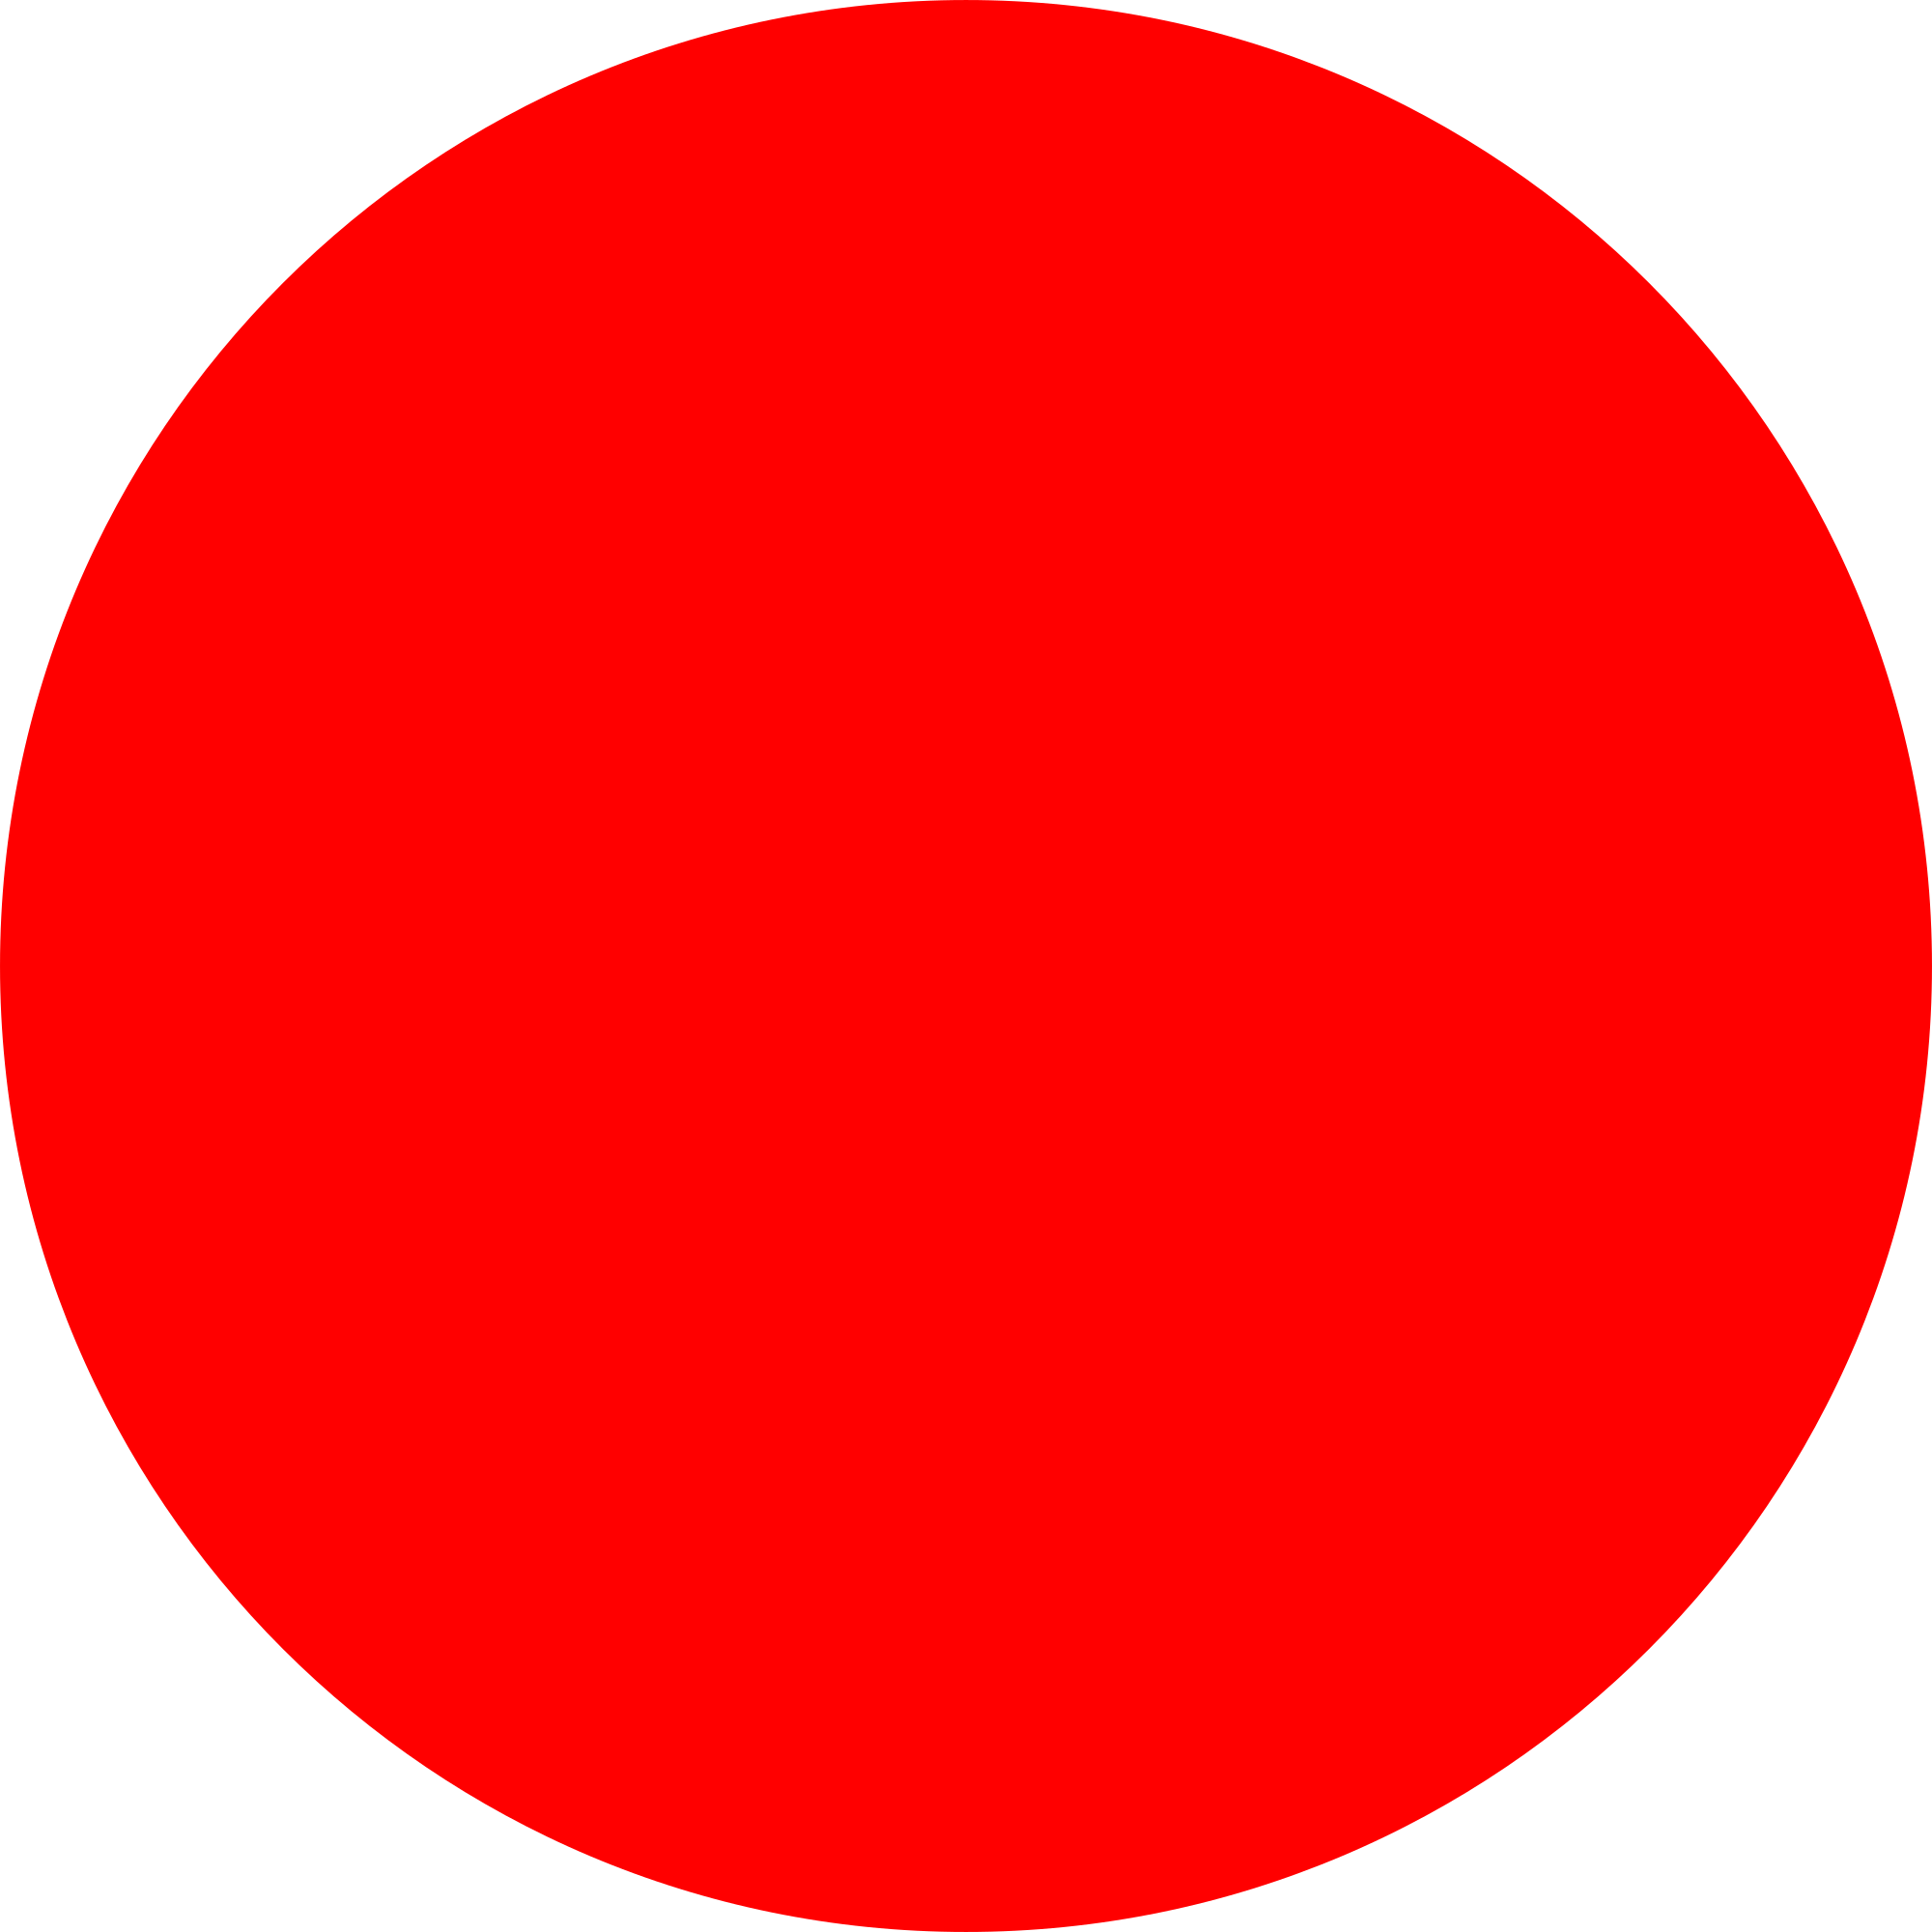 https://upload.wikimedia.org/wikipedia/commons/thumb/1/14/Roter-punkt.svg/2000px-Roter-punkt.svg.png